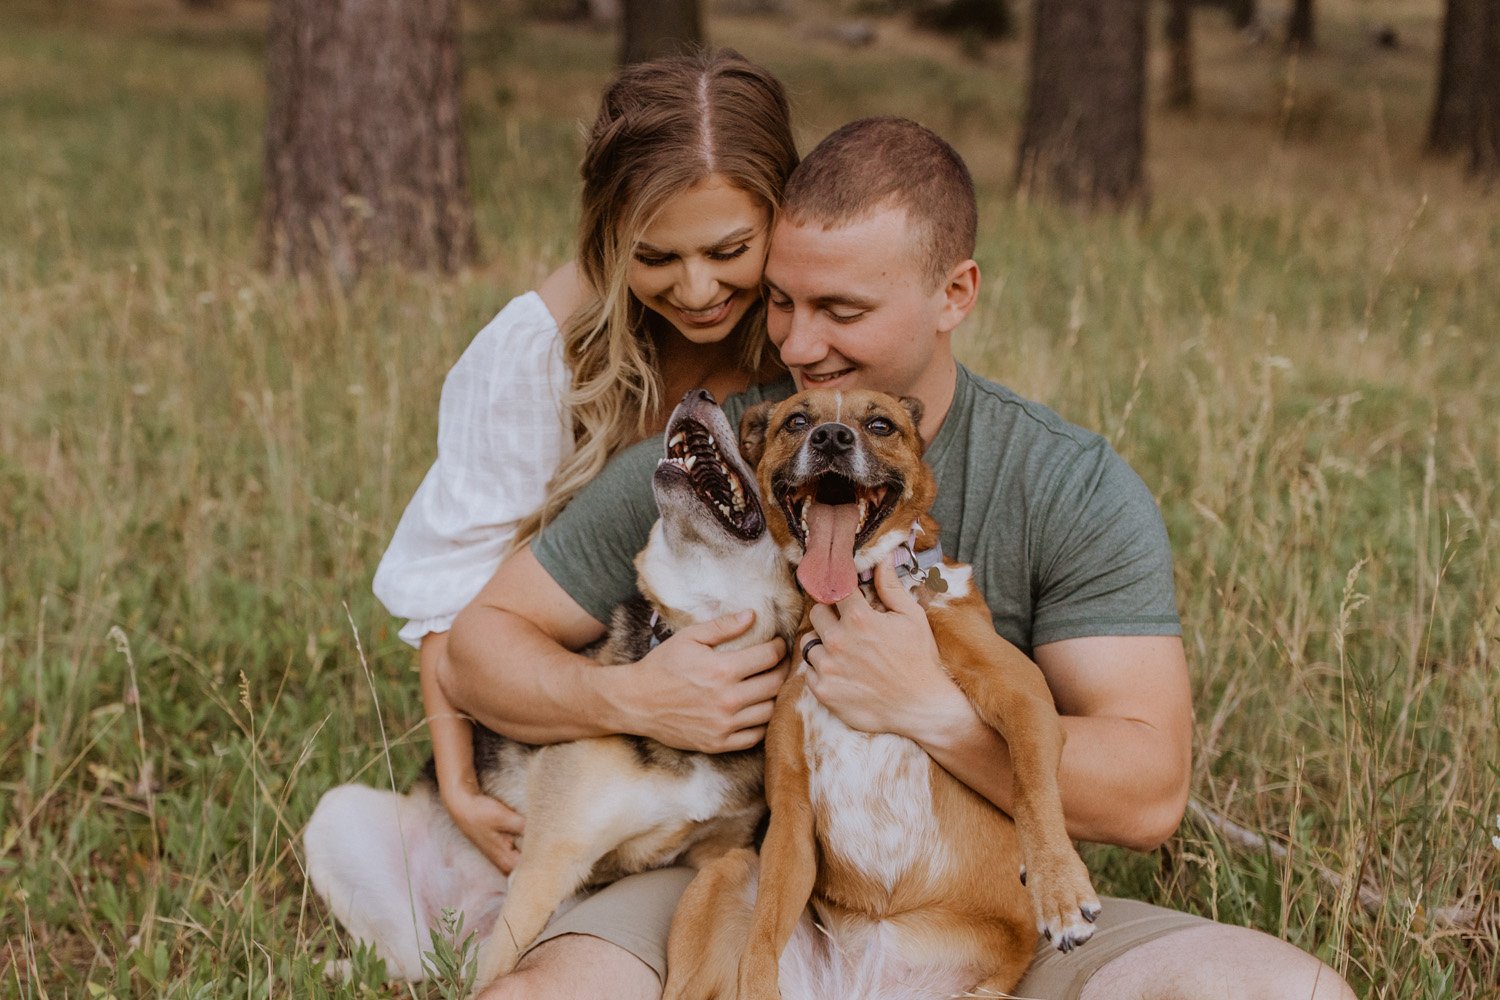 Tips For Bringing Your Dog To Your Photoshoot